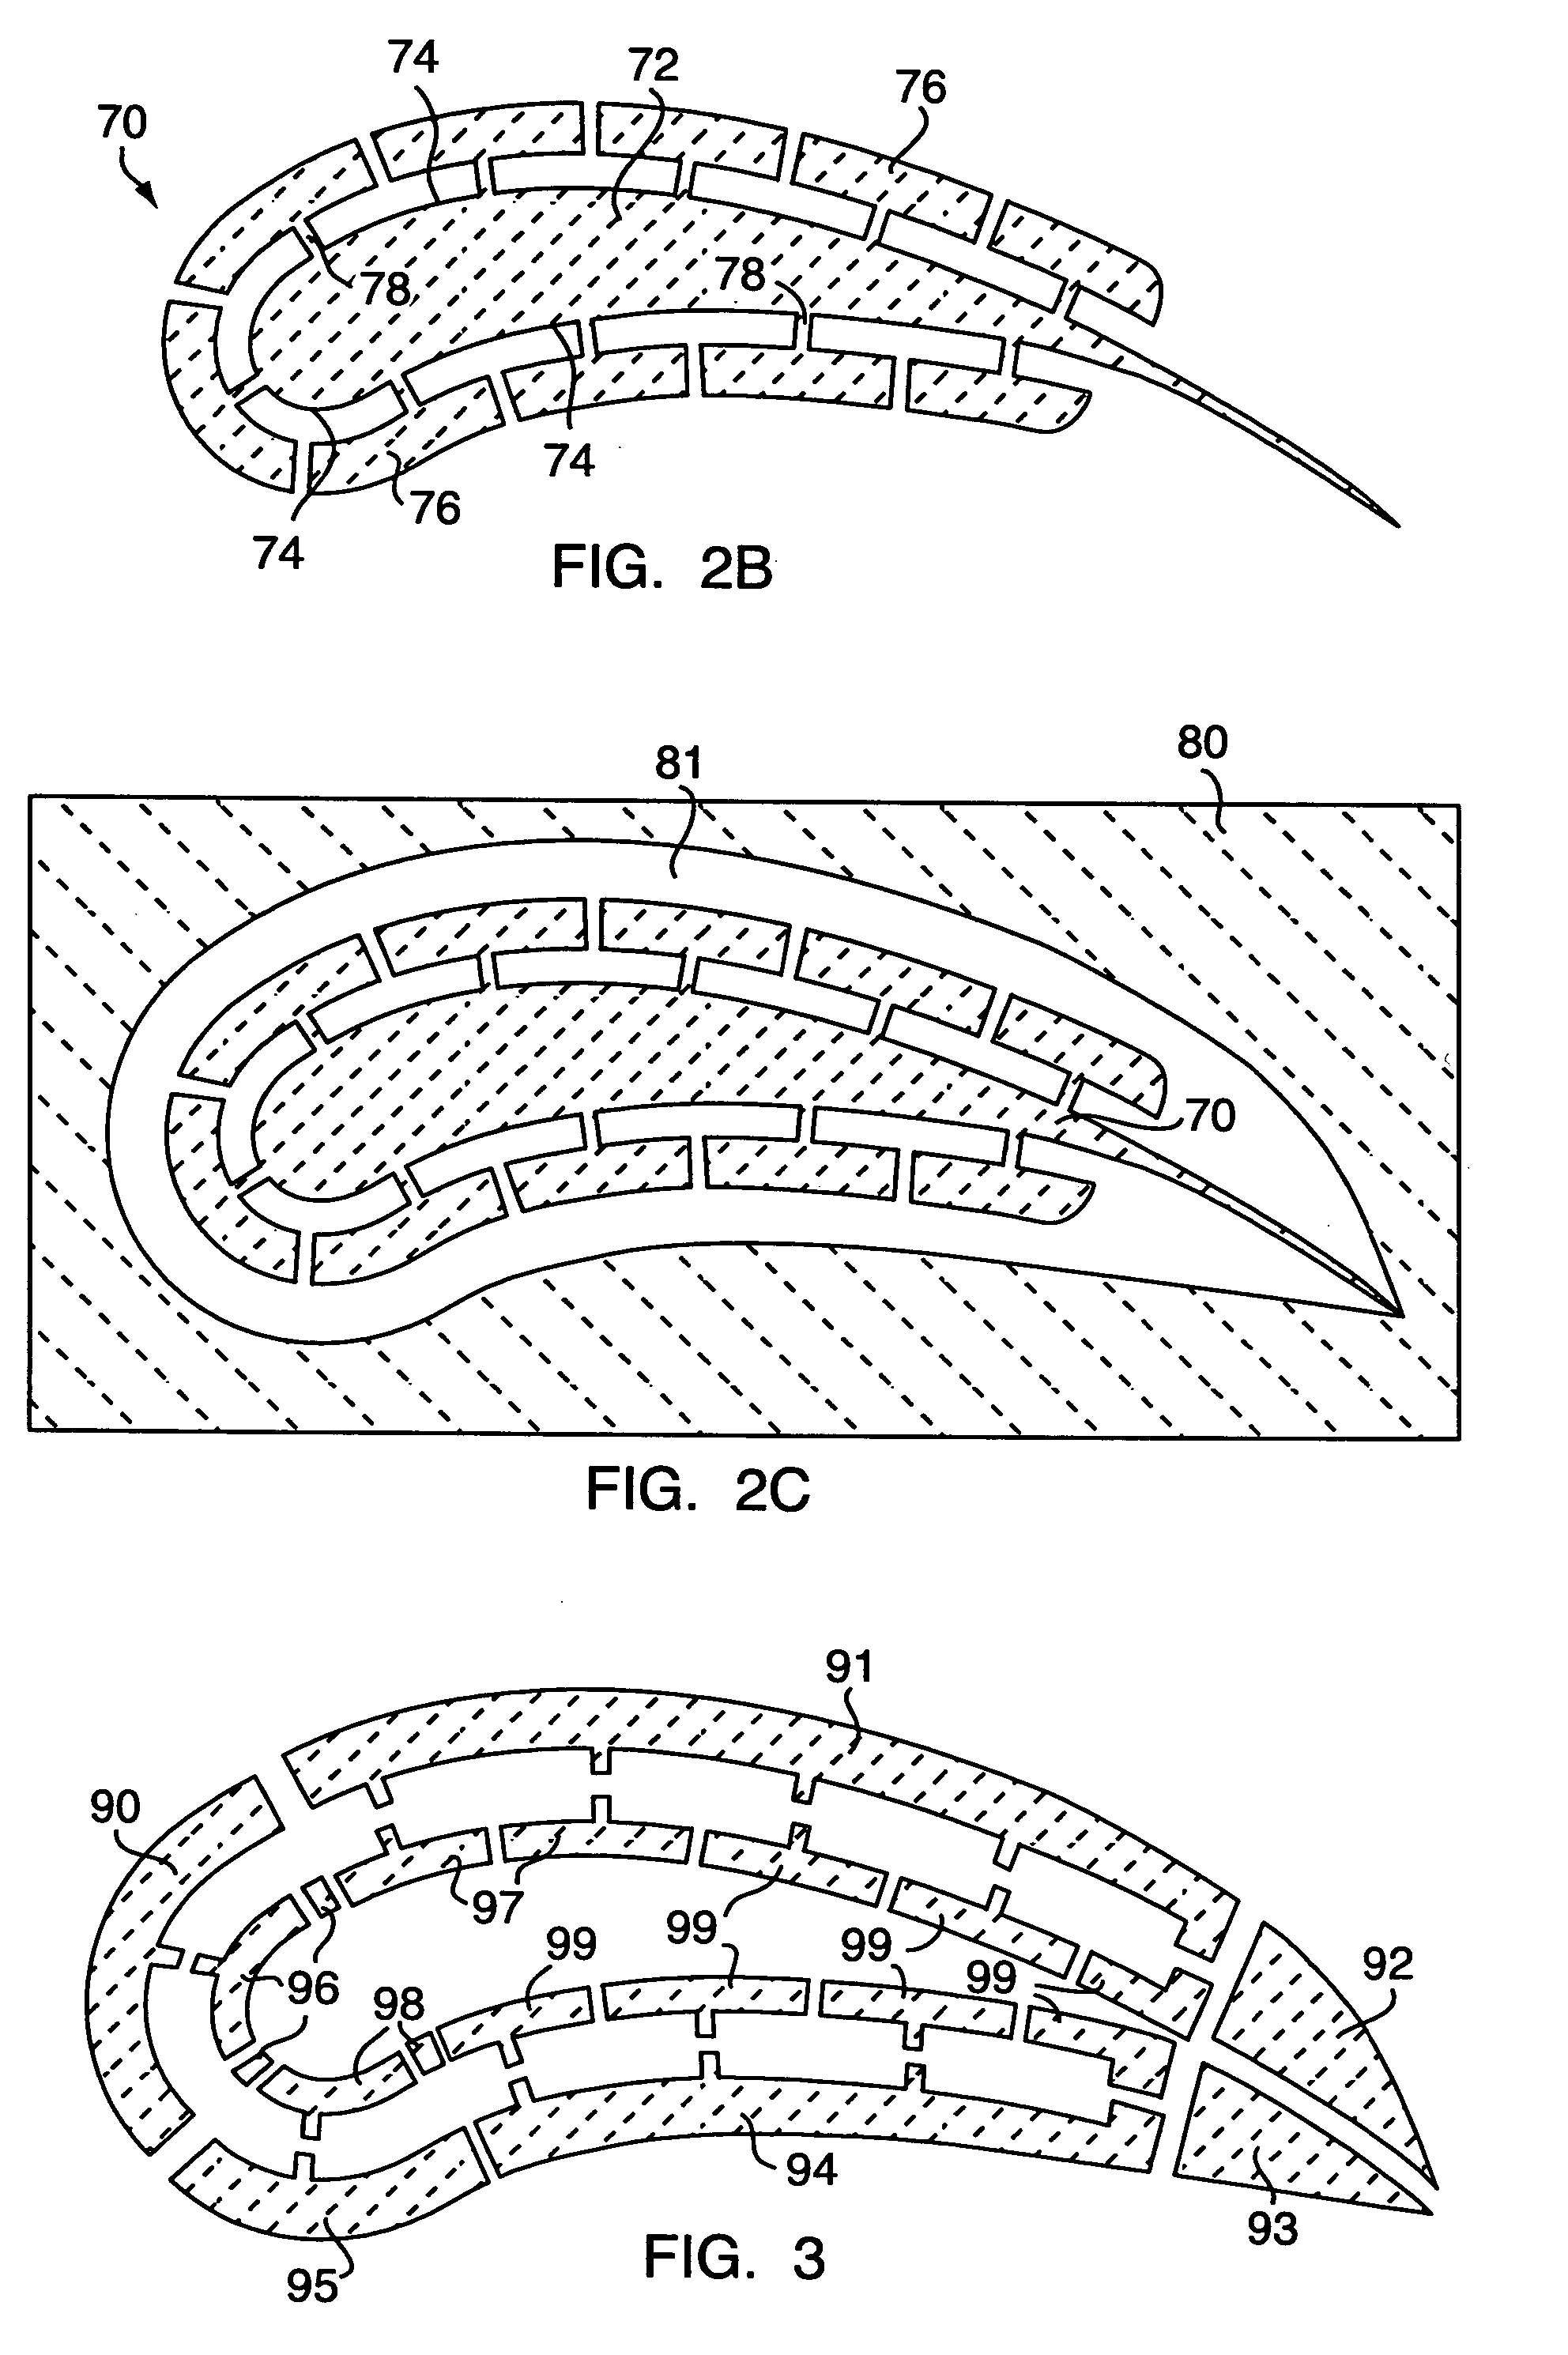 Method of producing unitary multi-element ceramic casting cores and integral core/shell system